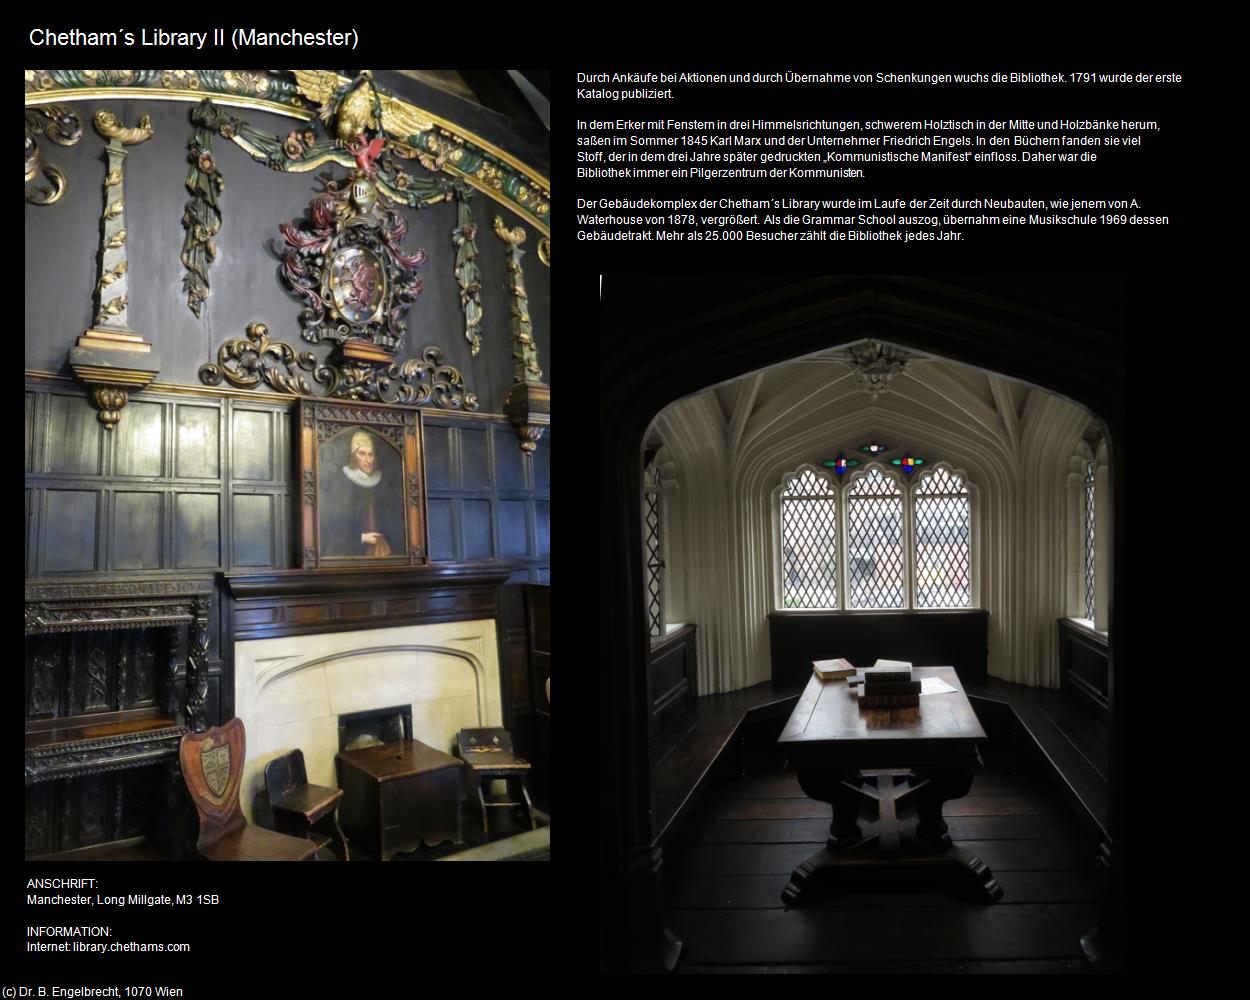 Chetham‘s Library II  (Manchester, England  ) in Kulturatlas-ENGLAND und WALES